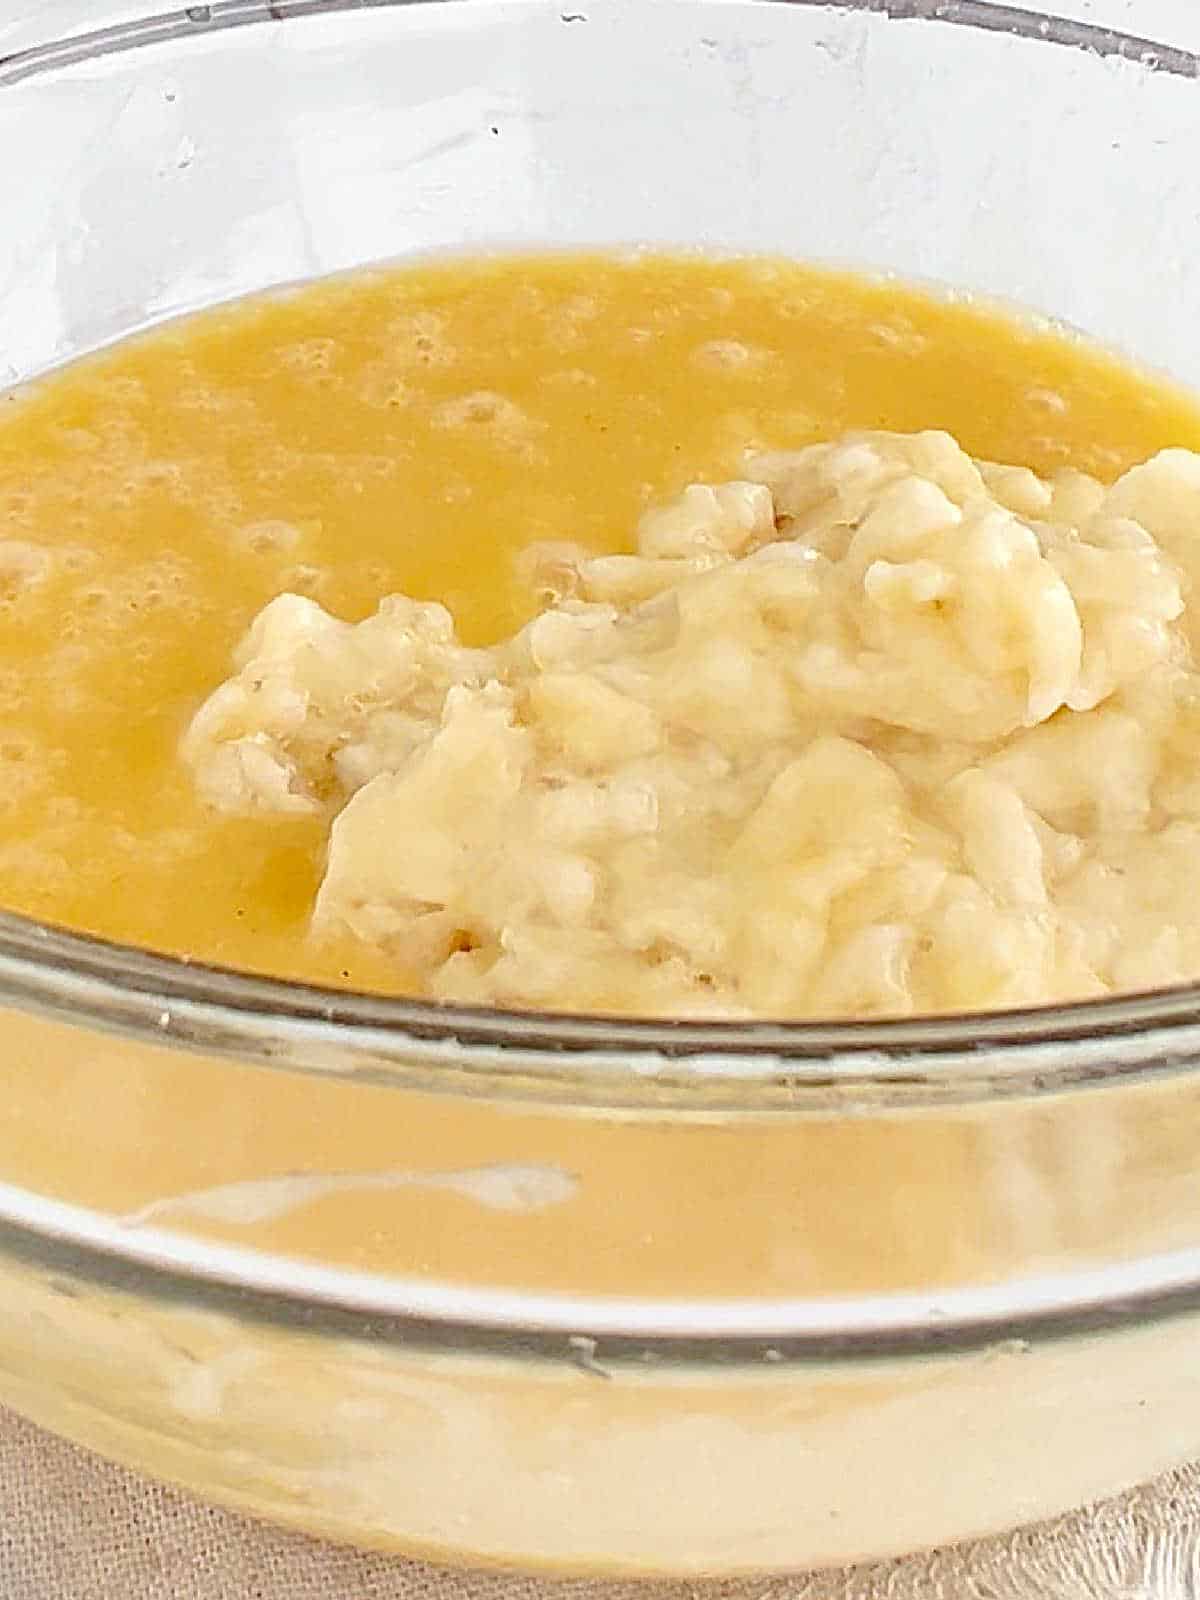 Mashed banana added to muffin batter in a glass bowl.